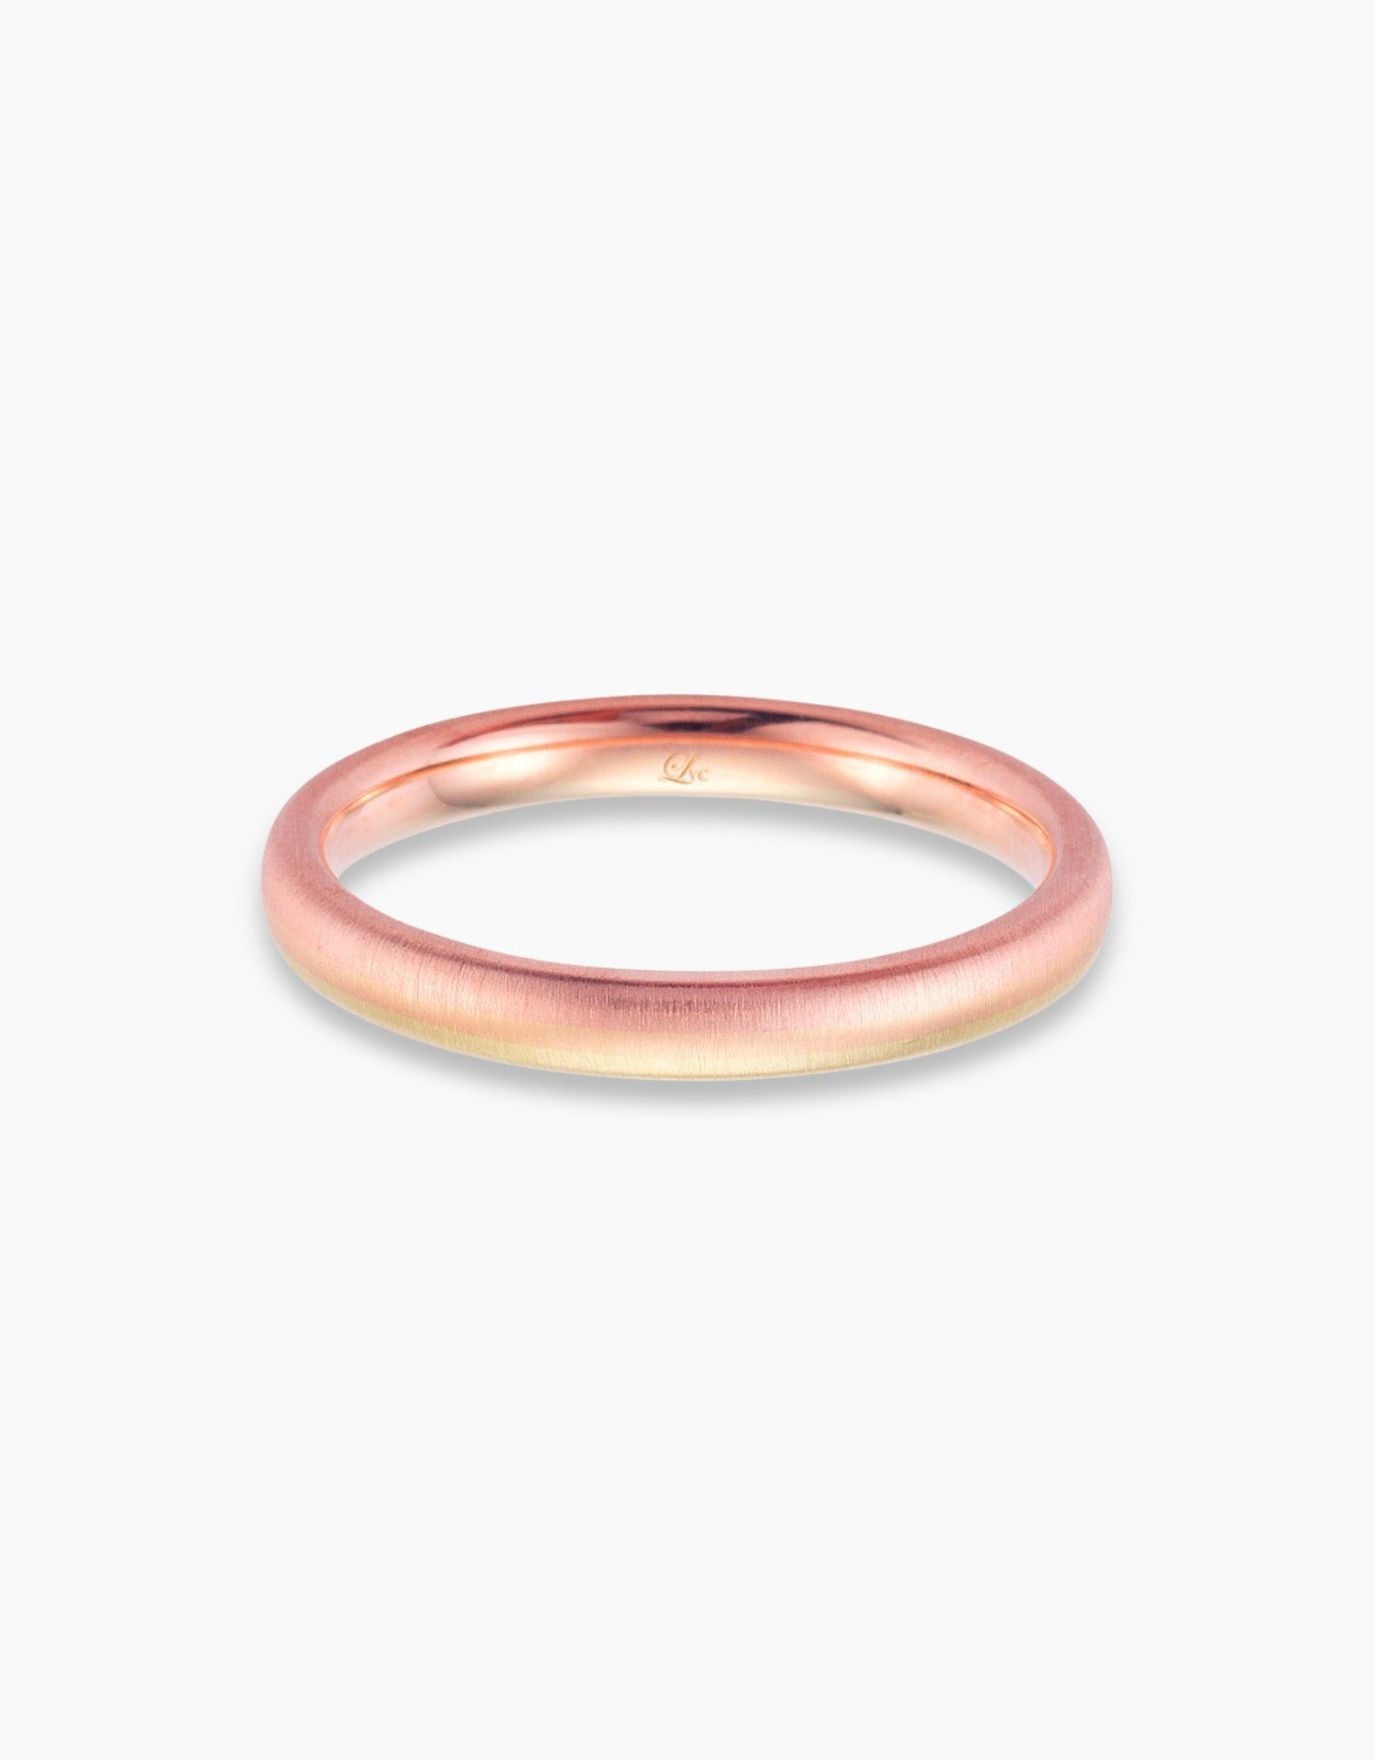 LVC Soleil Wedding Band in Yellow and Rose Gold